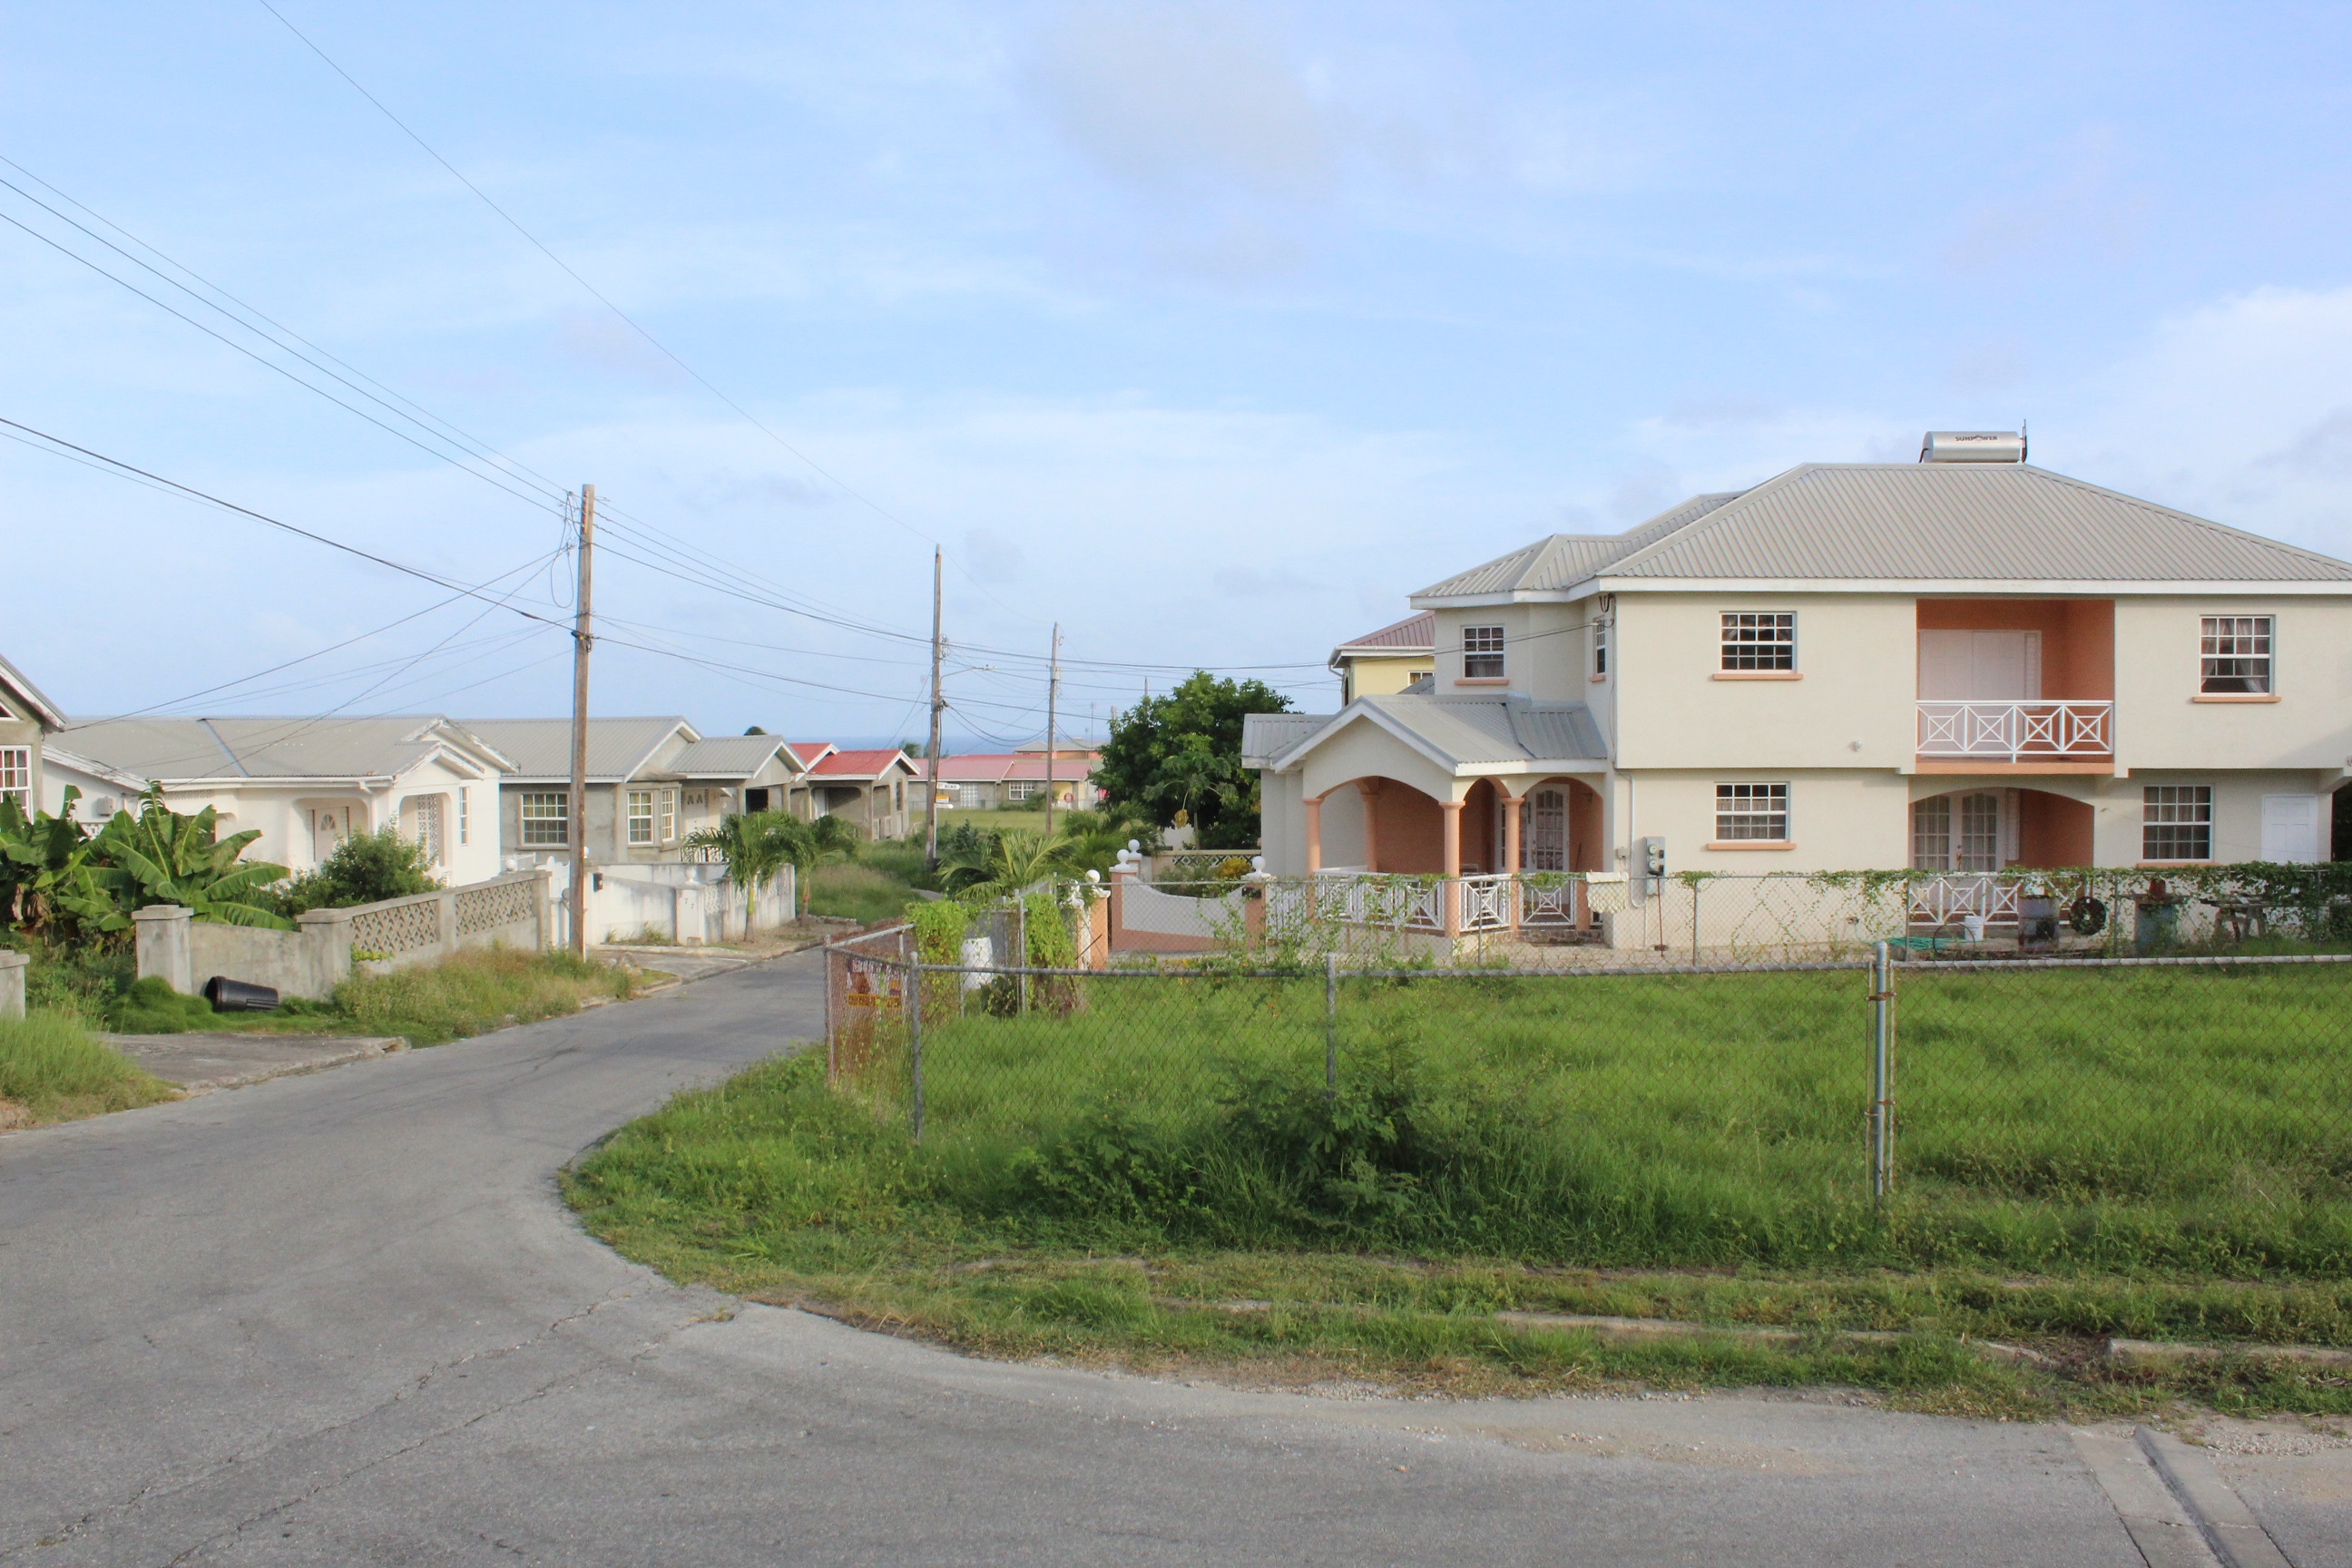 Inchcape Terrace, Lot 188, St. Philip, Barbados